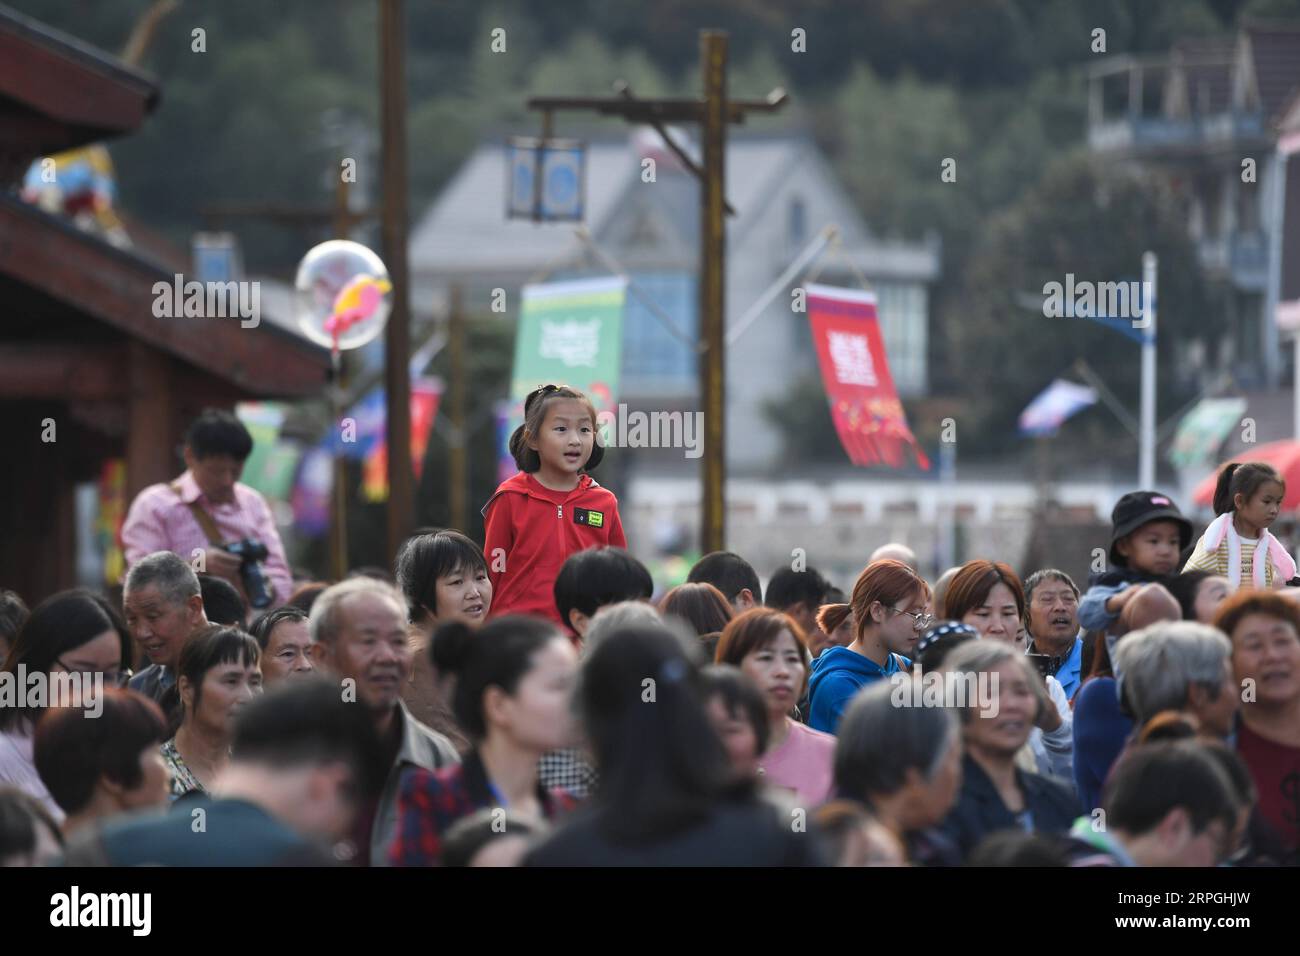 191016 -- HANGZHOU, Oct. 16, 2019 -- Local villagers and tourists enjoy performance during the long-table banquet held at Longfeng ethnic village in Eshan Township of the She ethnic group of Tonglu County, east China s Zhejiang Province, Oct. 16, 2019. More than 90 tables of delicacies were presented at the long-table banquet, attracting local villagers as well as tourists to enjoy the food of the She ethnic group.  CHINA-ZHEJIANG-ESHAN-LONG-TABLE BANQUET CN HuangxZongzhi PUBLICATIONxNOTxINxCHN Stock Photo